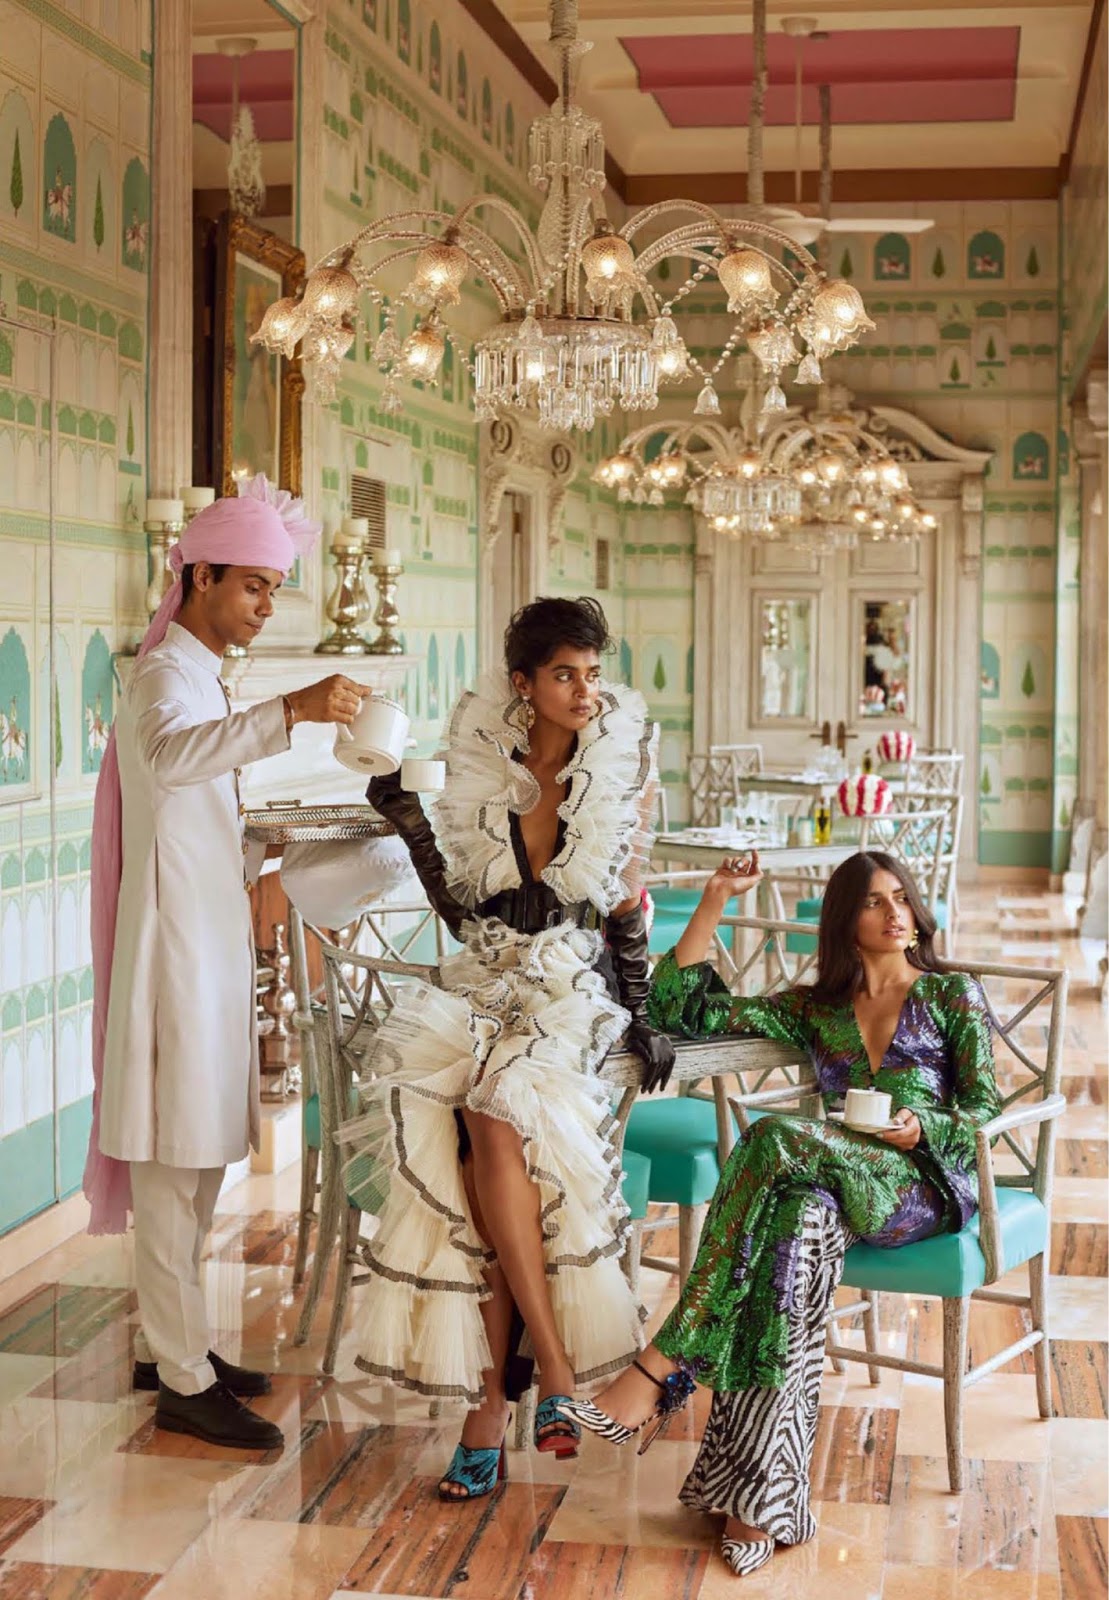 Vadher & Nair by Greg Swales for Vogue India Sept 2018 (13).jpg